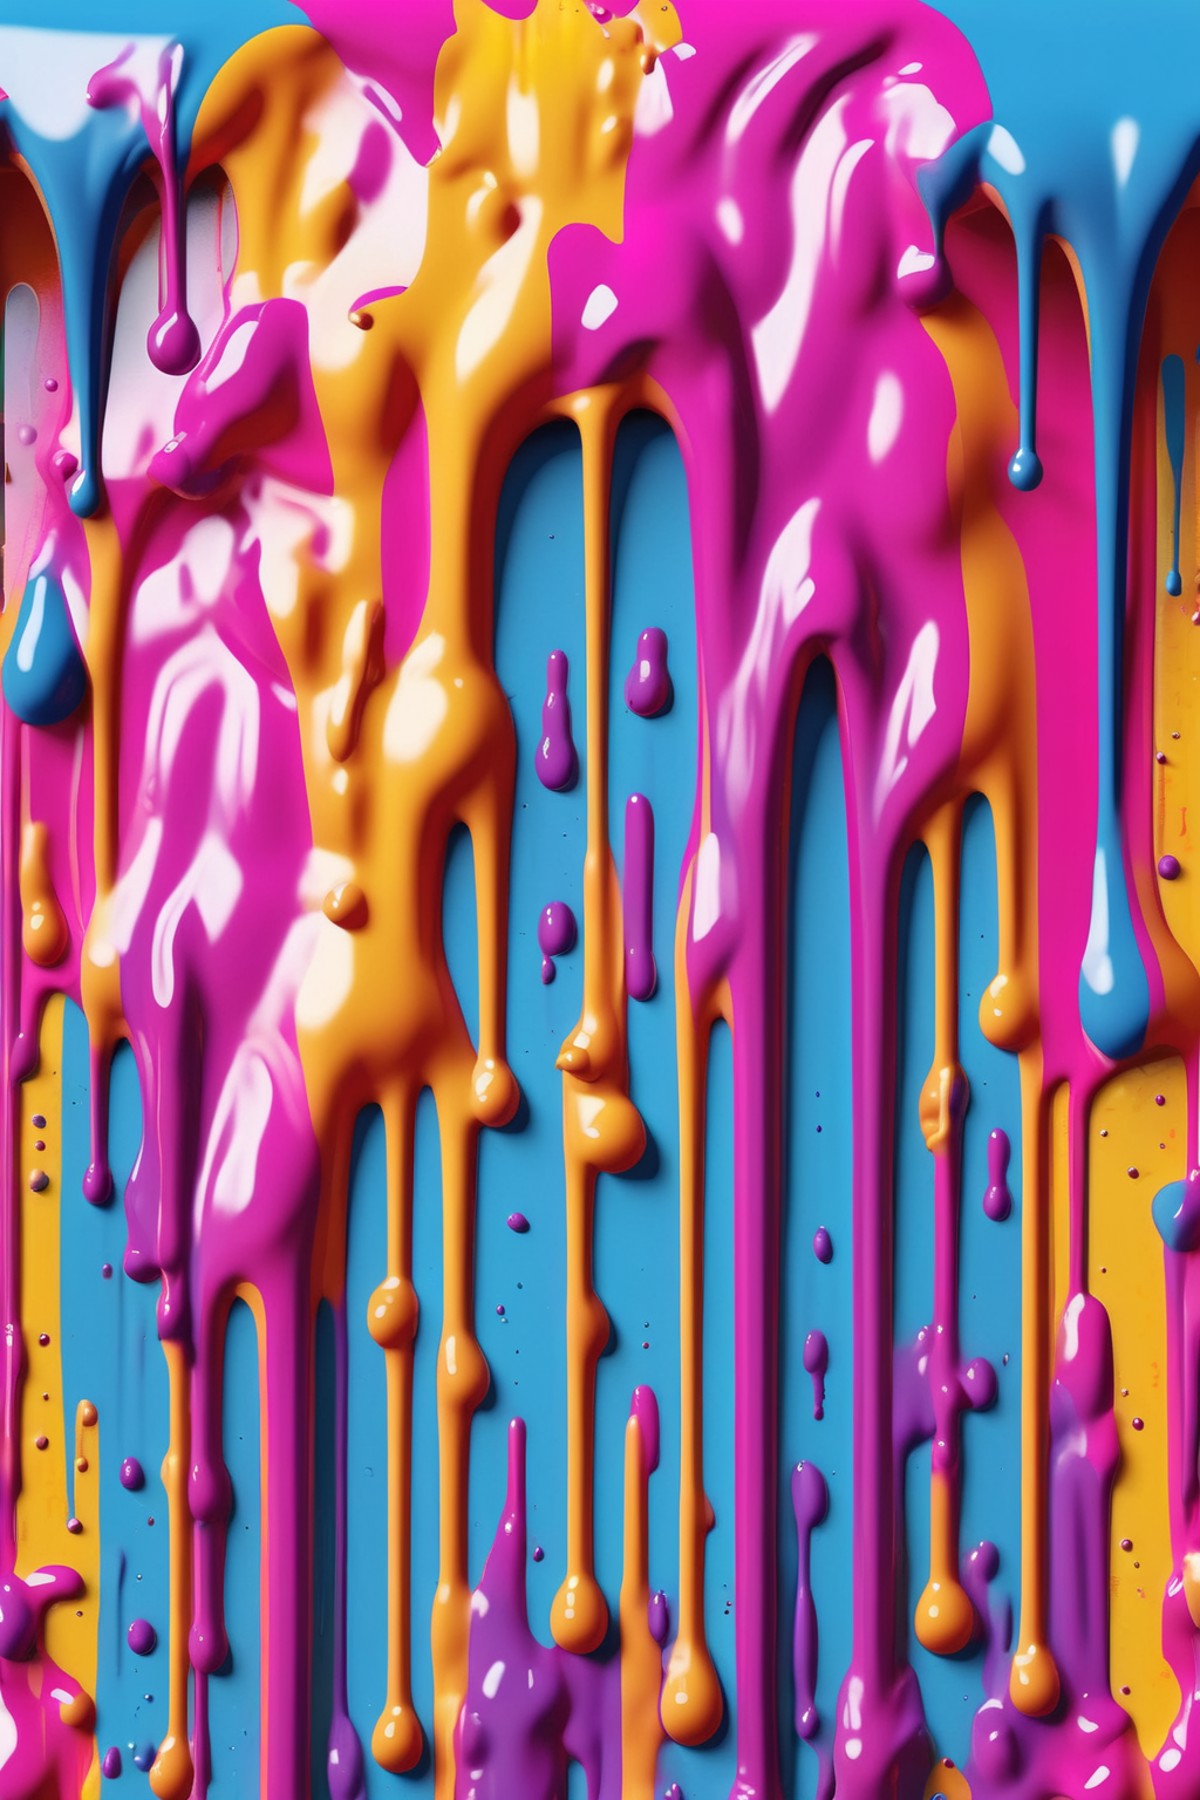 <lora:Dripping Art:1>Dripping Art - cool design made of dripping paint that looks like graffiti bright colors